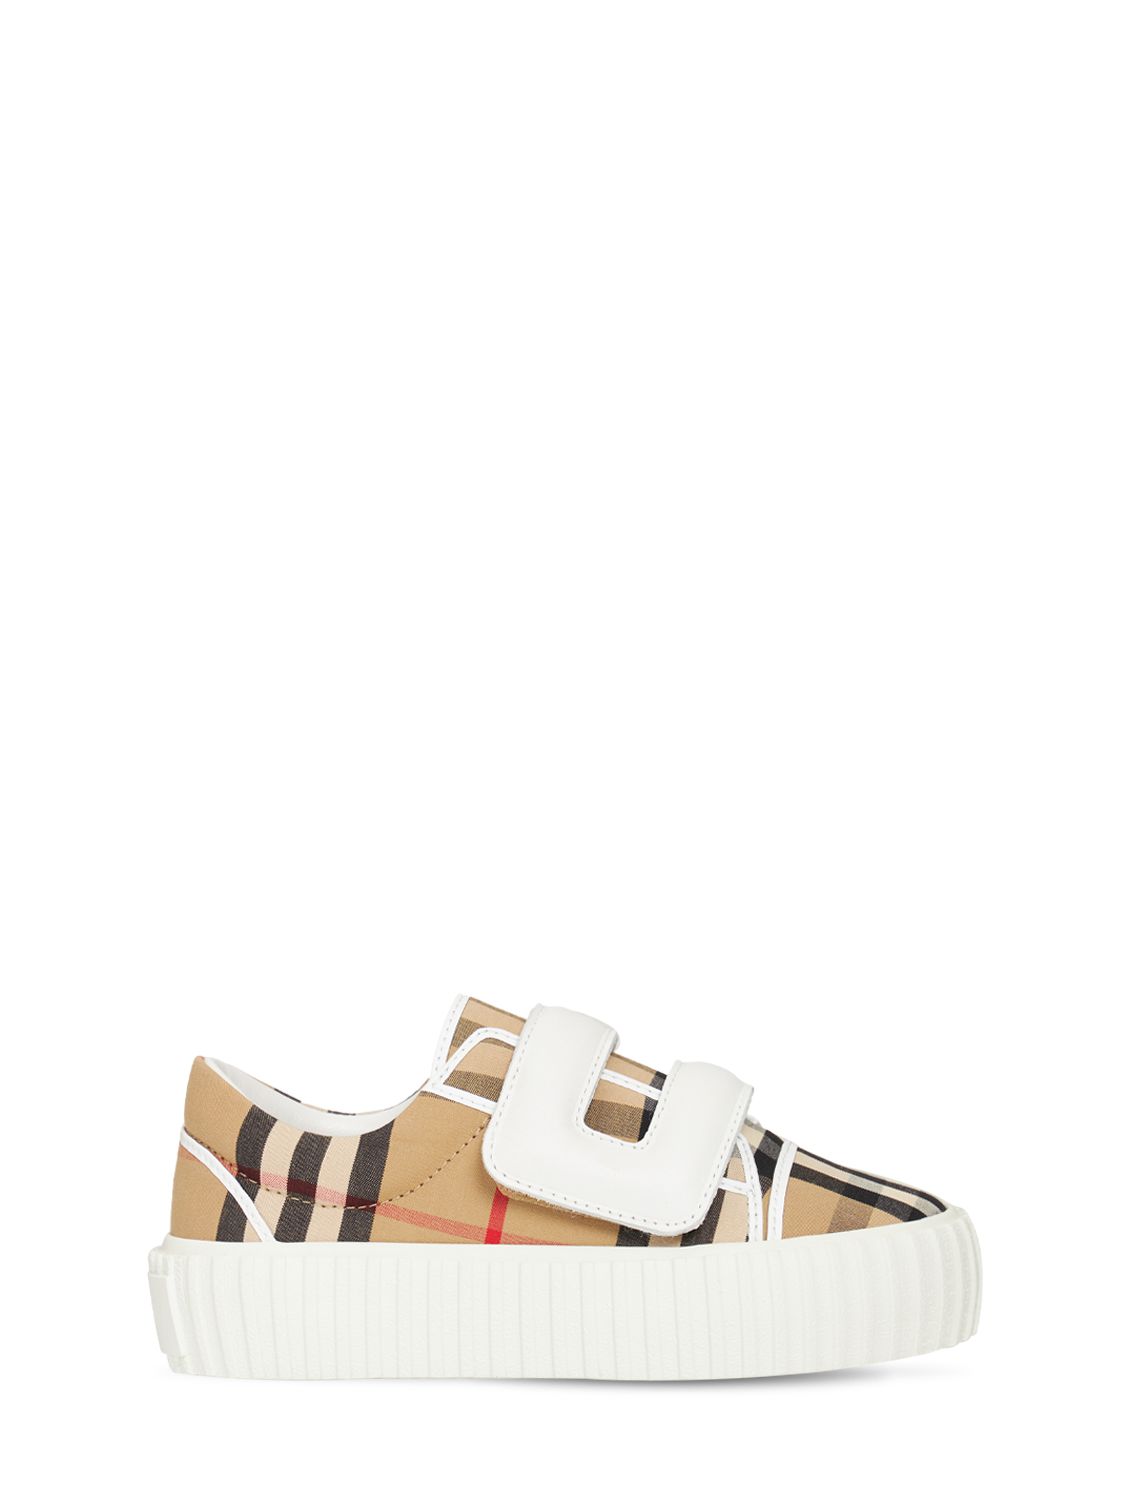 Burberry Kids' Check Print Cotton Strap Trainers In Beige